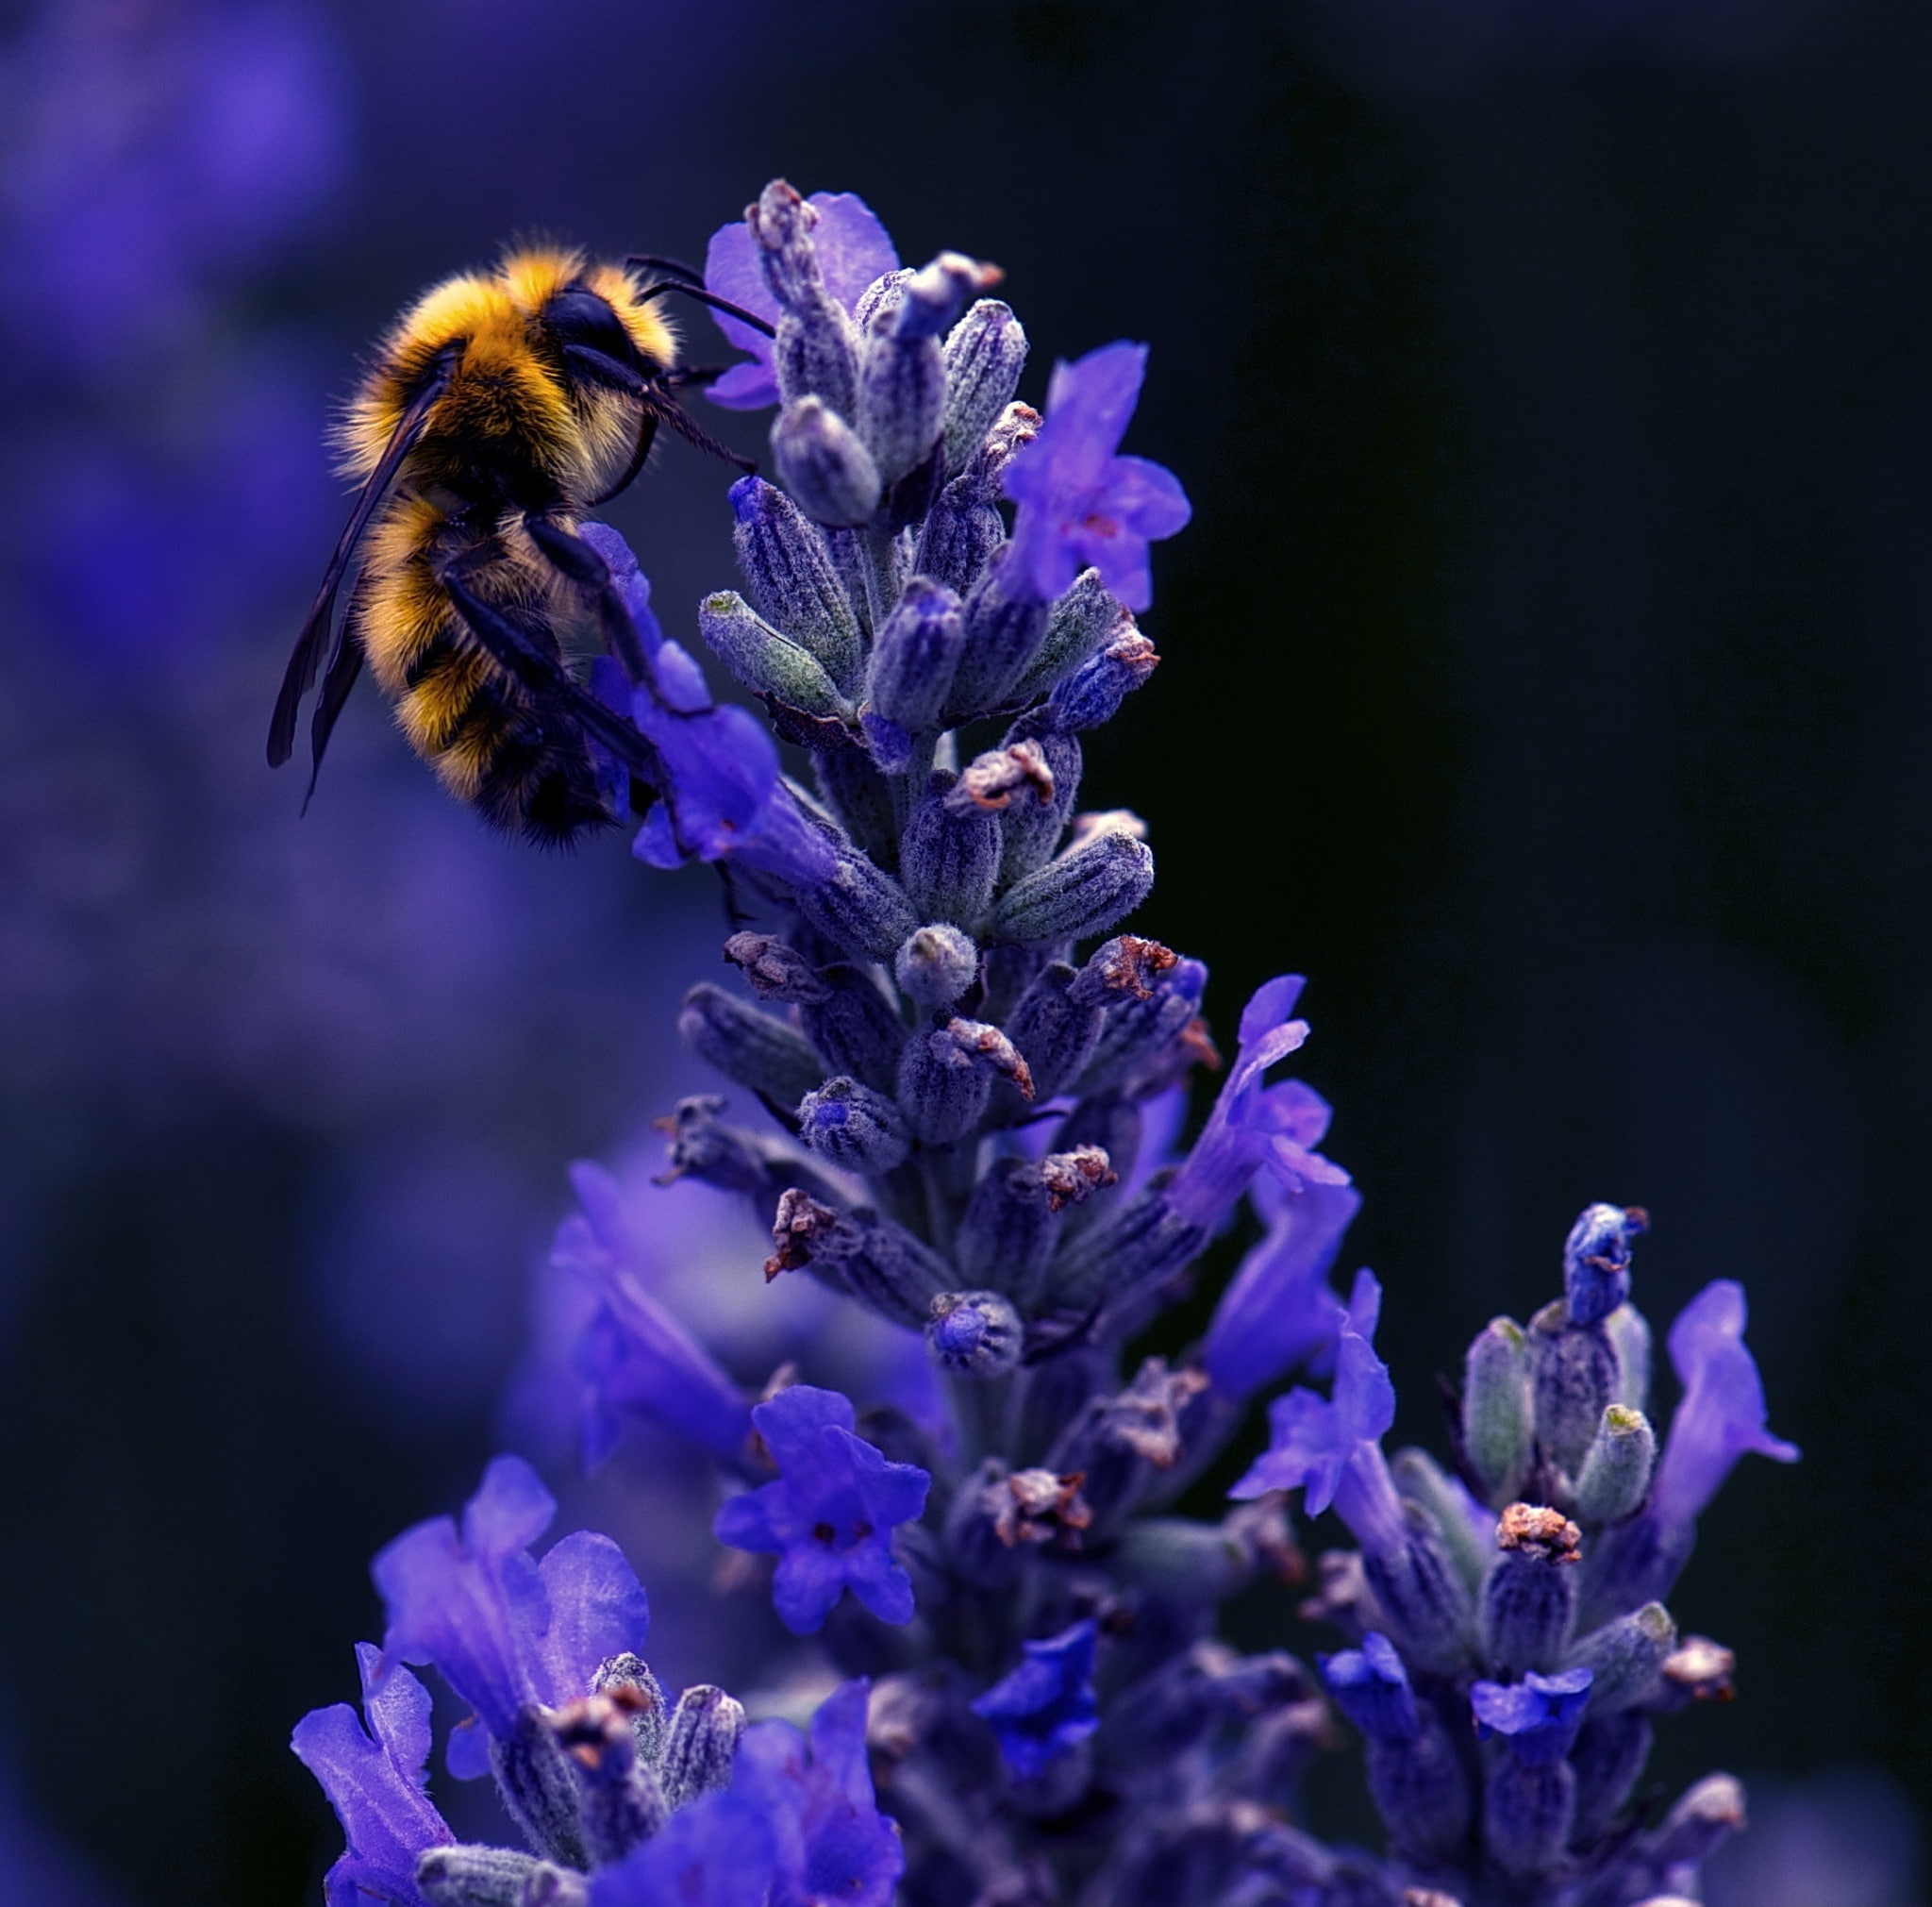 Bumblebee, Animals, Insects, Dark, Purple, Flowers, Photography